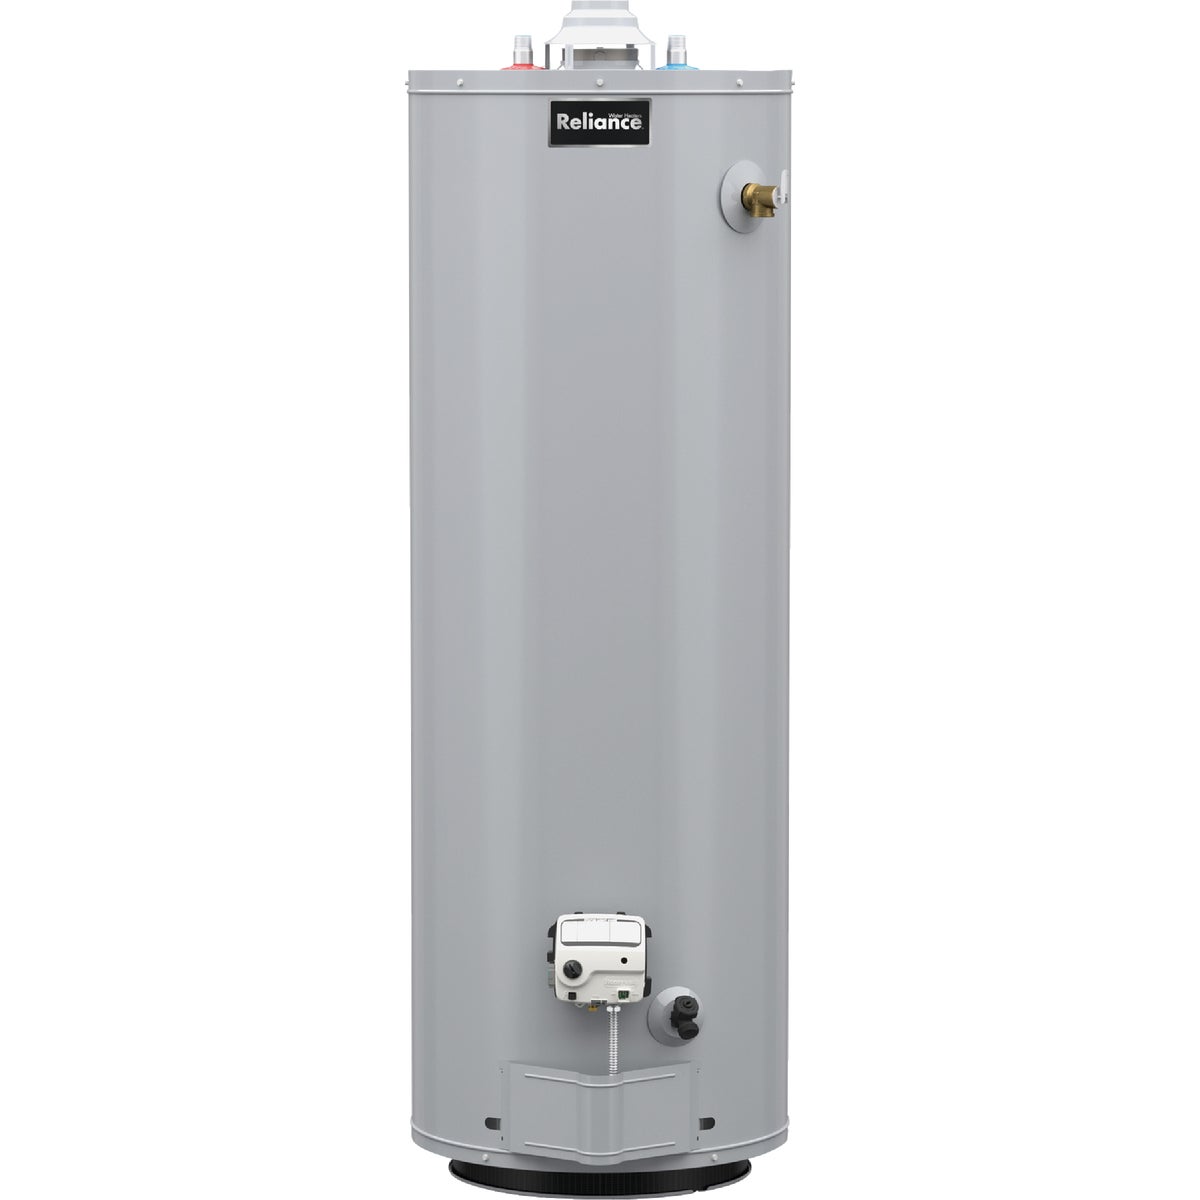 Item 401876, Natural gas water heater. For installations from sea level to 10,100 Ft..